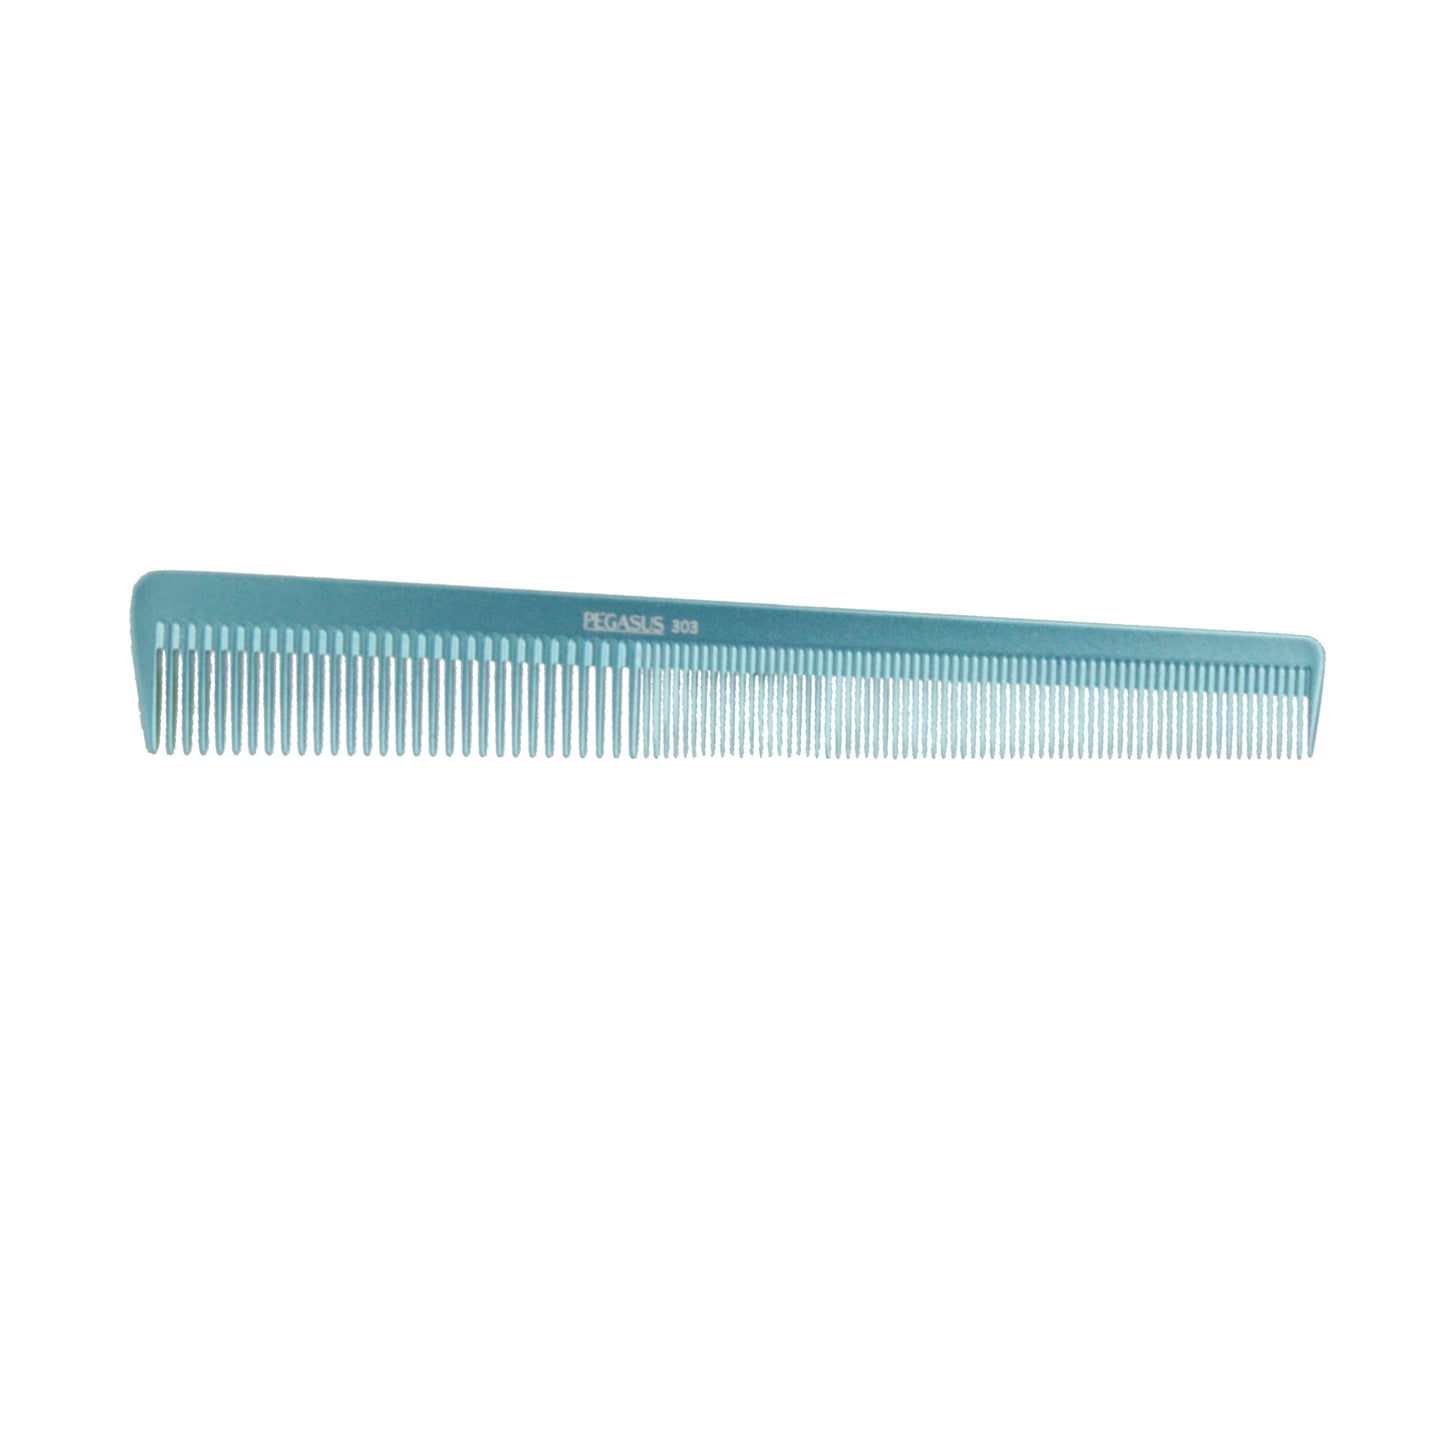 Pegasus MICOLOR 303, 6.5in Hard Rubber Heavy Barber Comb, Handmade, Seamless, Smooth Edges, Anti Static, Heat and Chemically Resistant, Wet Hair, Everyday Grooming Comb | Peines de goma dura - Green